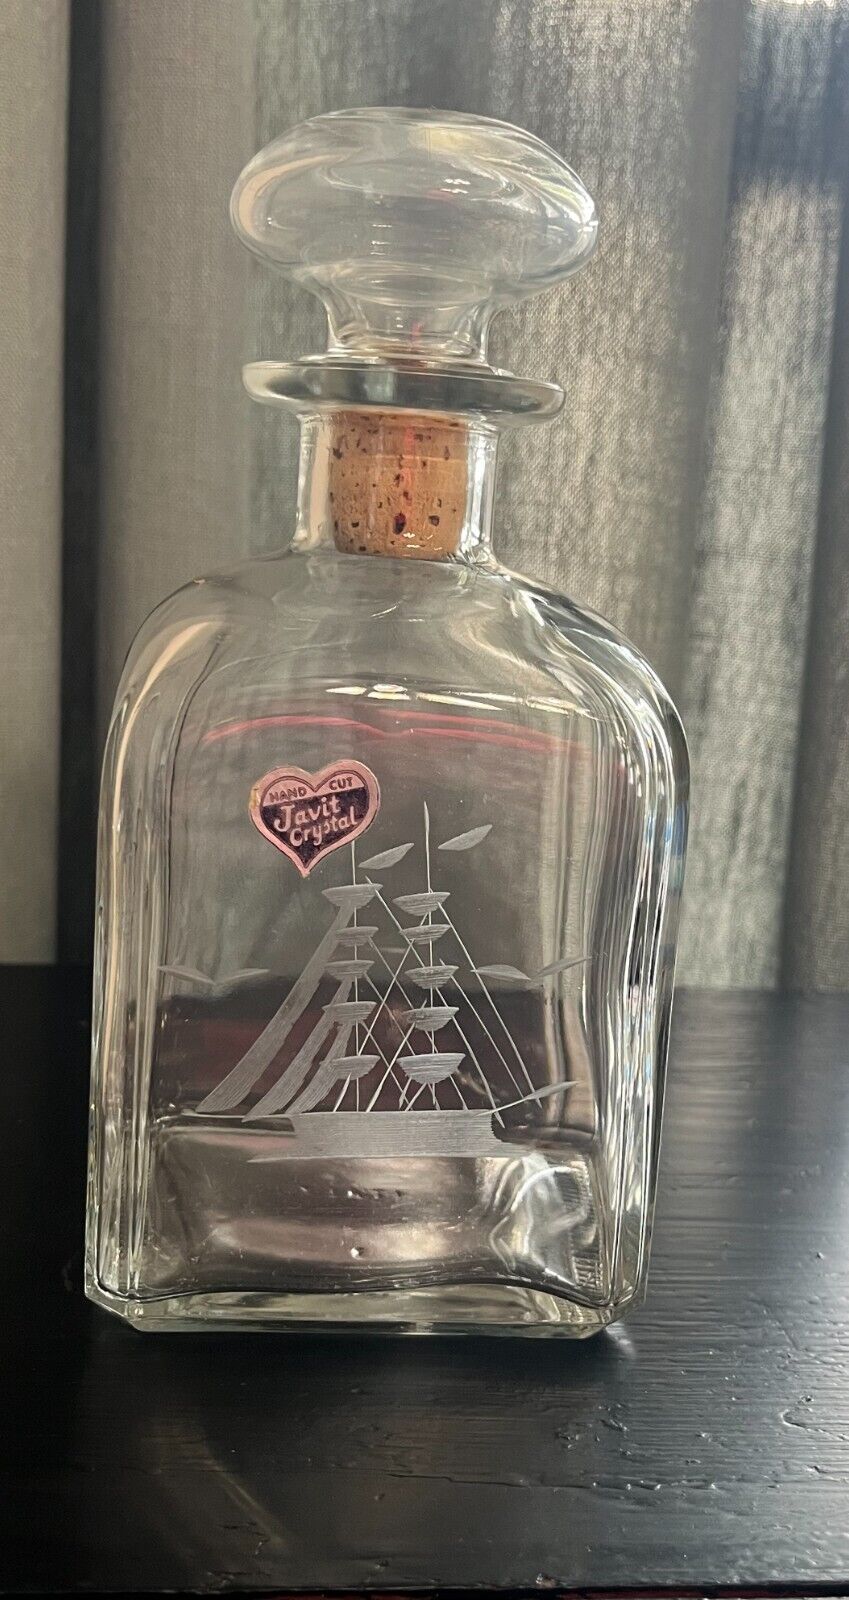 Vintage- hand cut Italian Javit crystal whisky decanter with sailboat